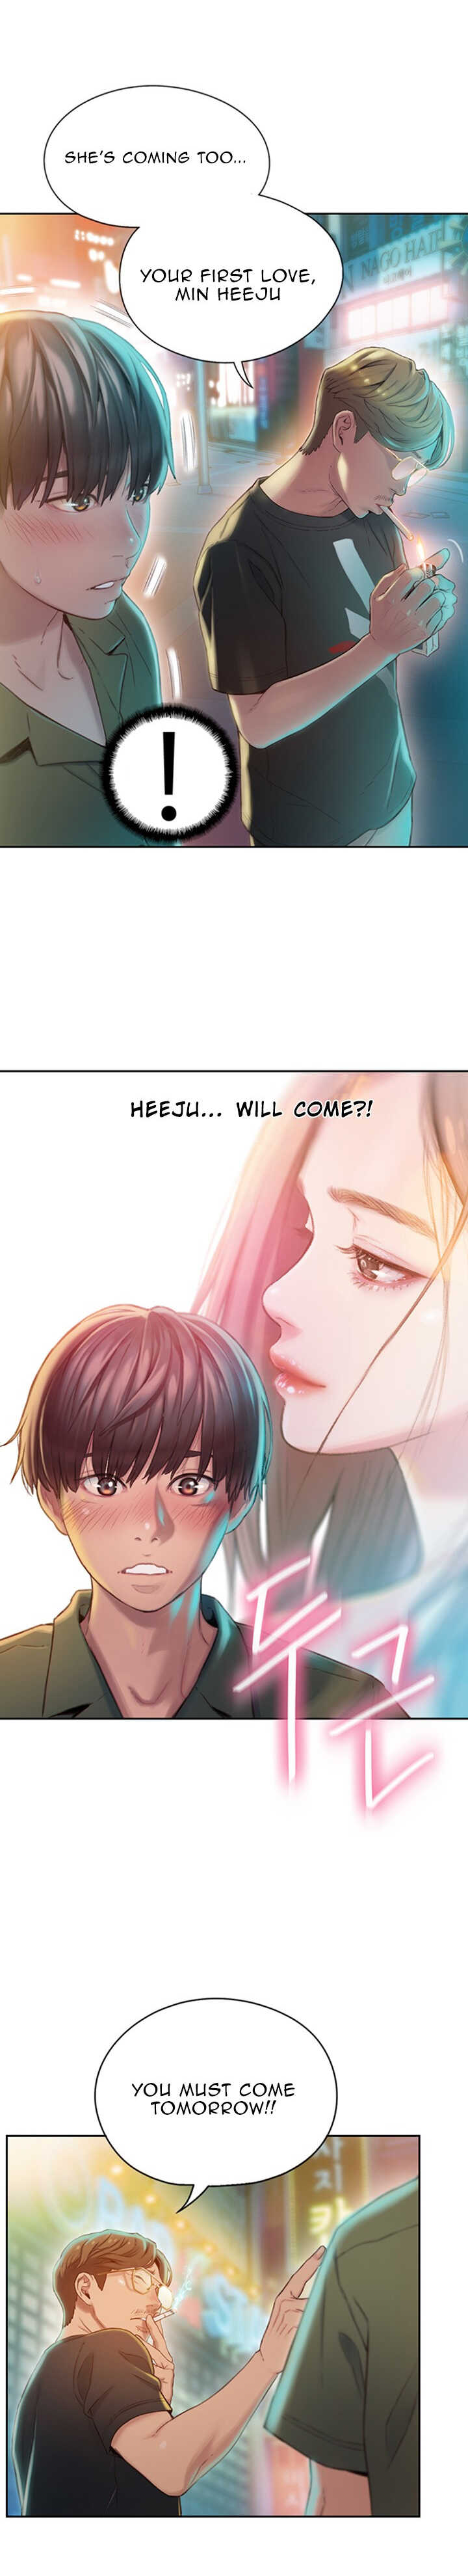 [Park Hyeongjun] Love Limit Exceeded (01-27) Ongoing - Page 29